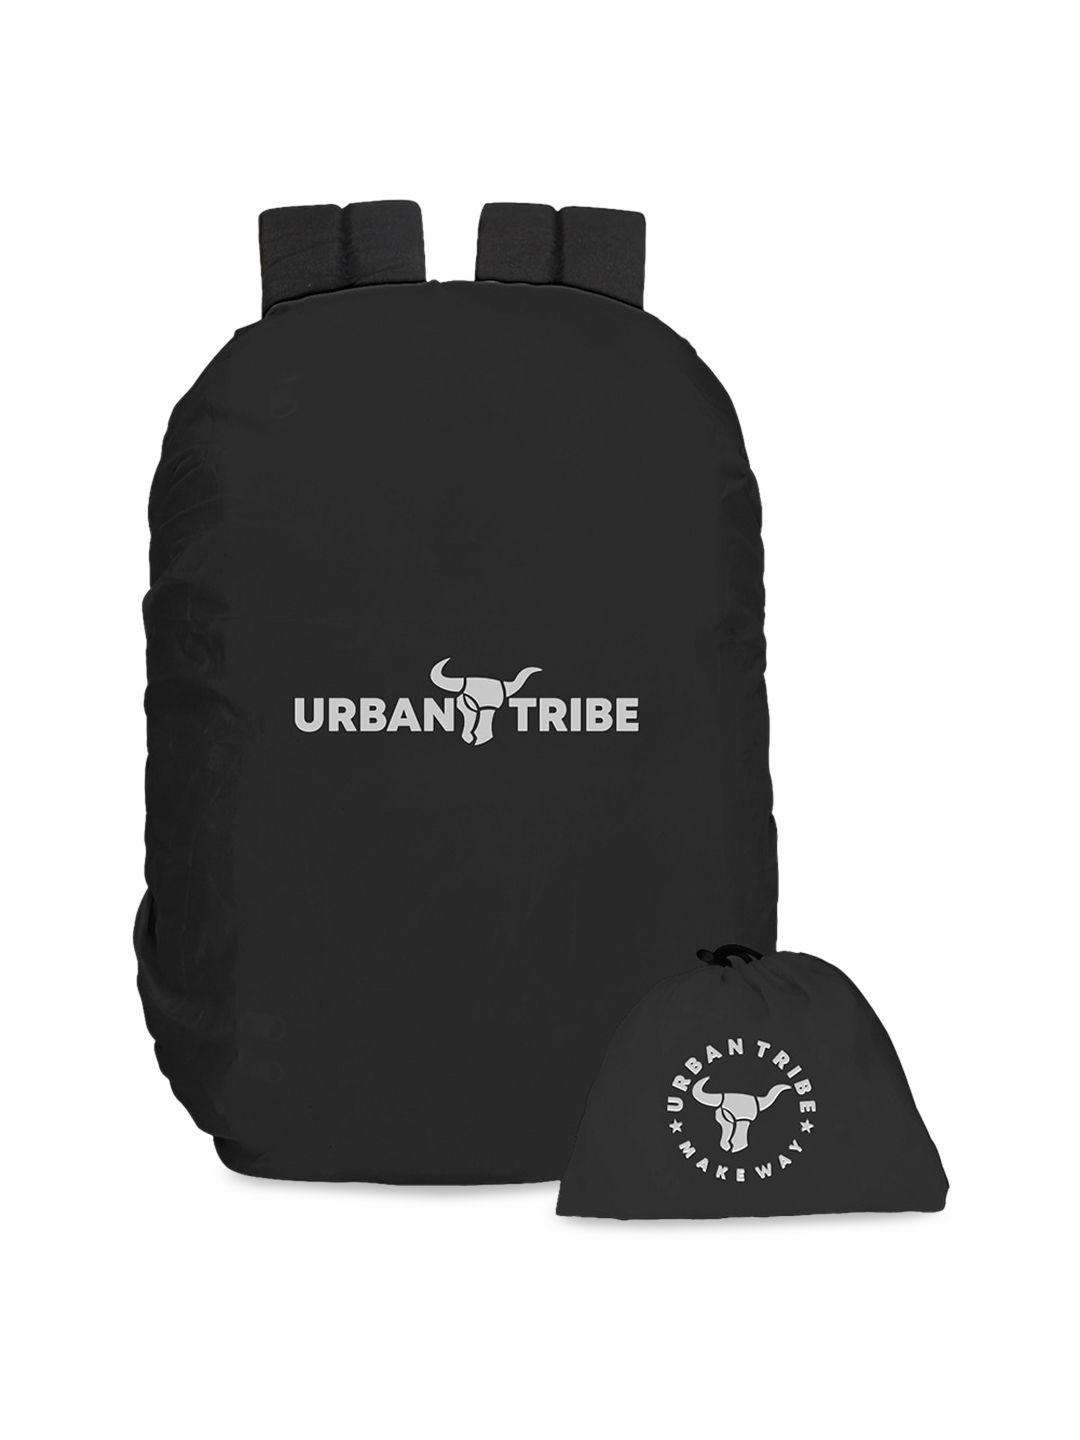 urban tribe black & white printed backpack rain cover with pouch